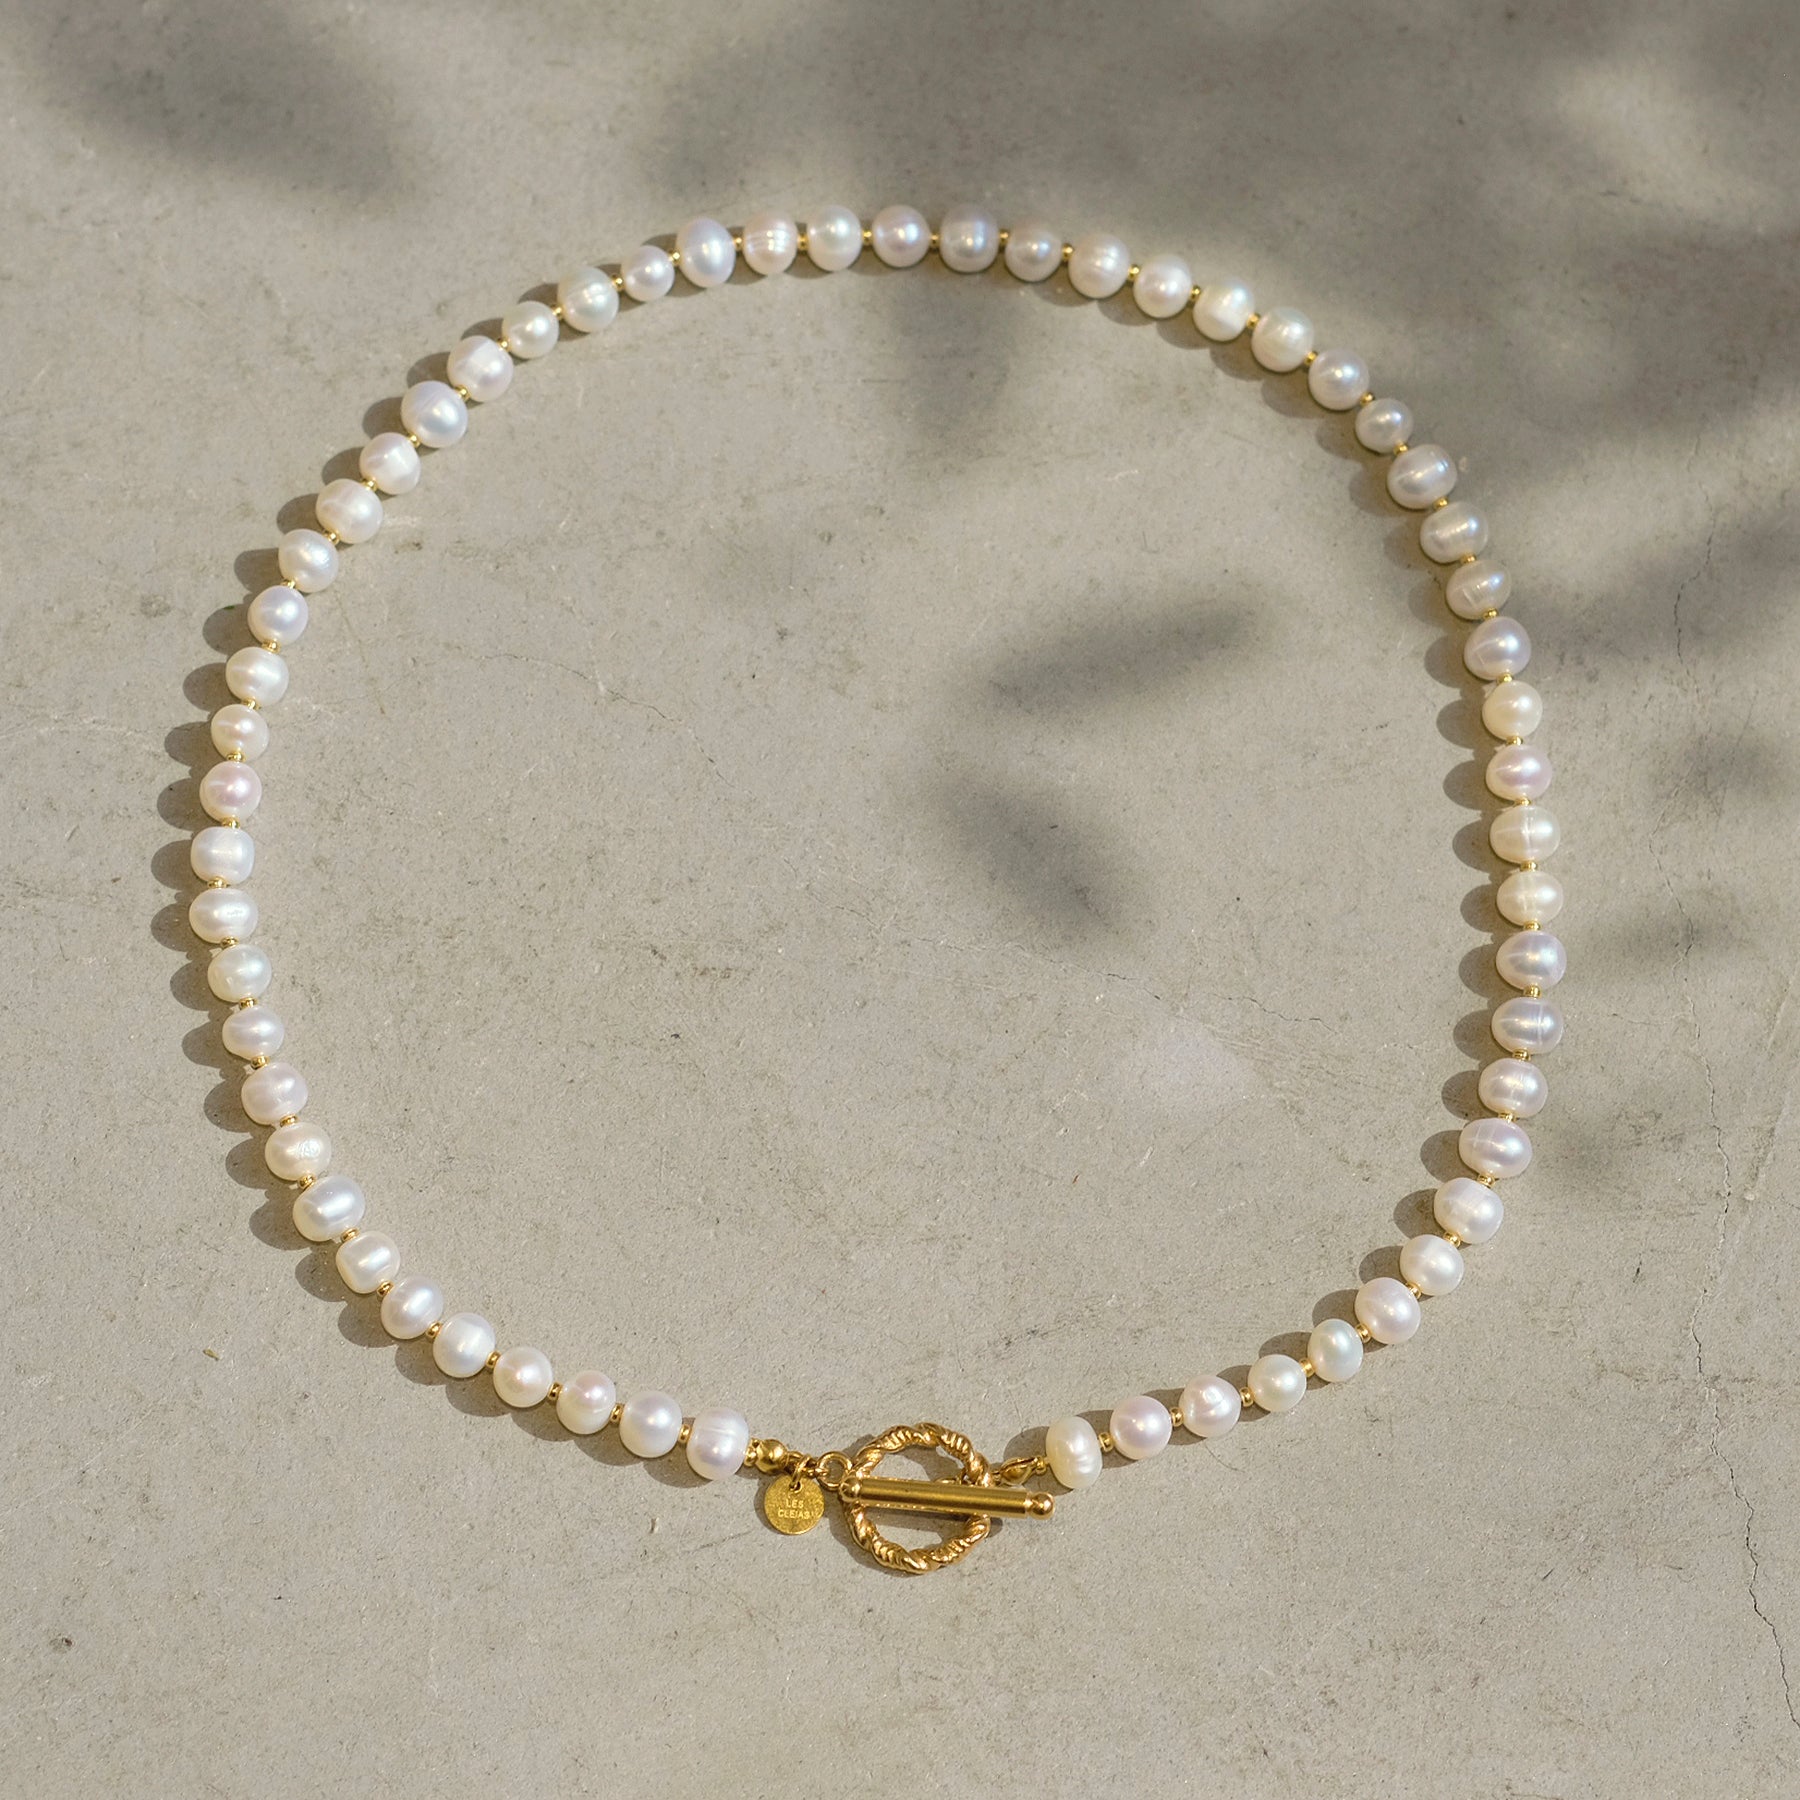 Freshwater pearls with ring clasp Short necklace